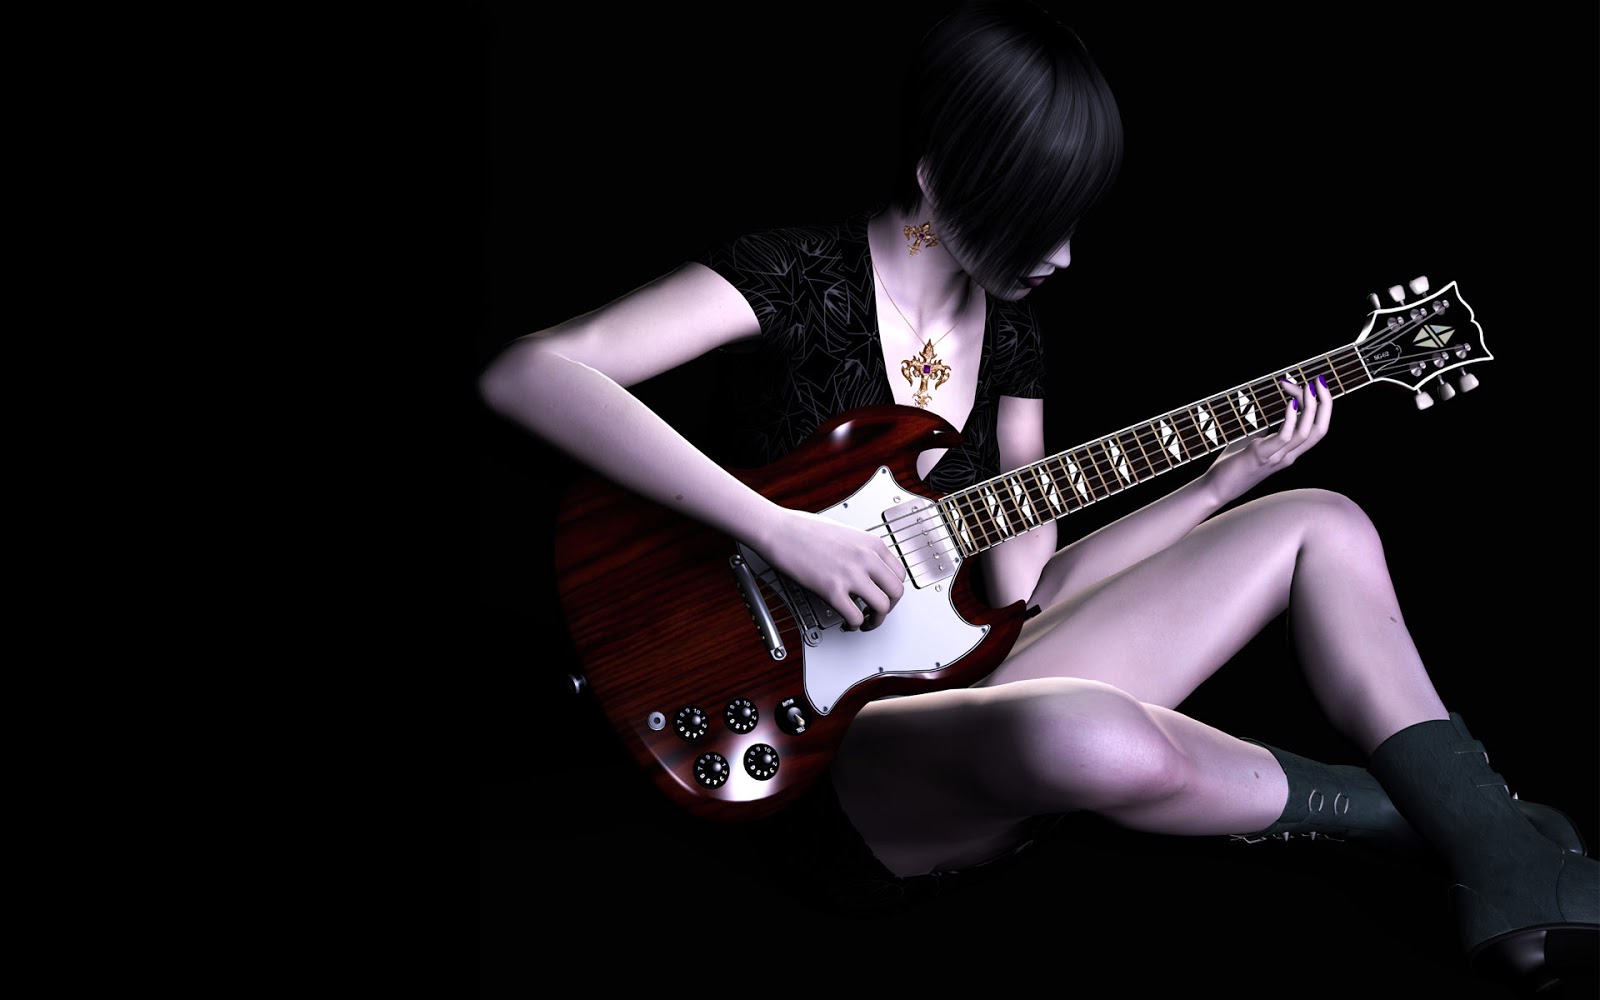 women+with+guitar+hd+images.jpg